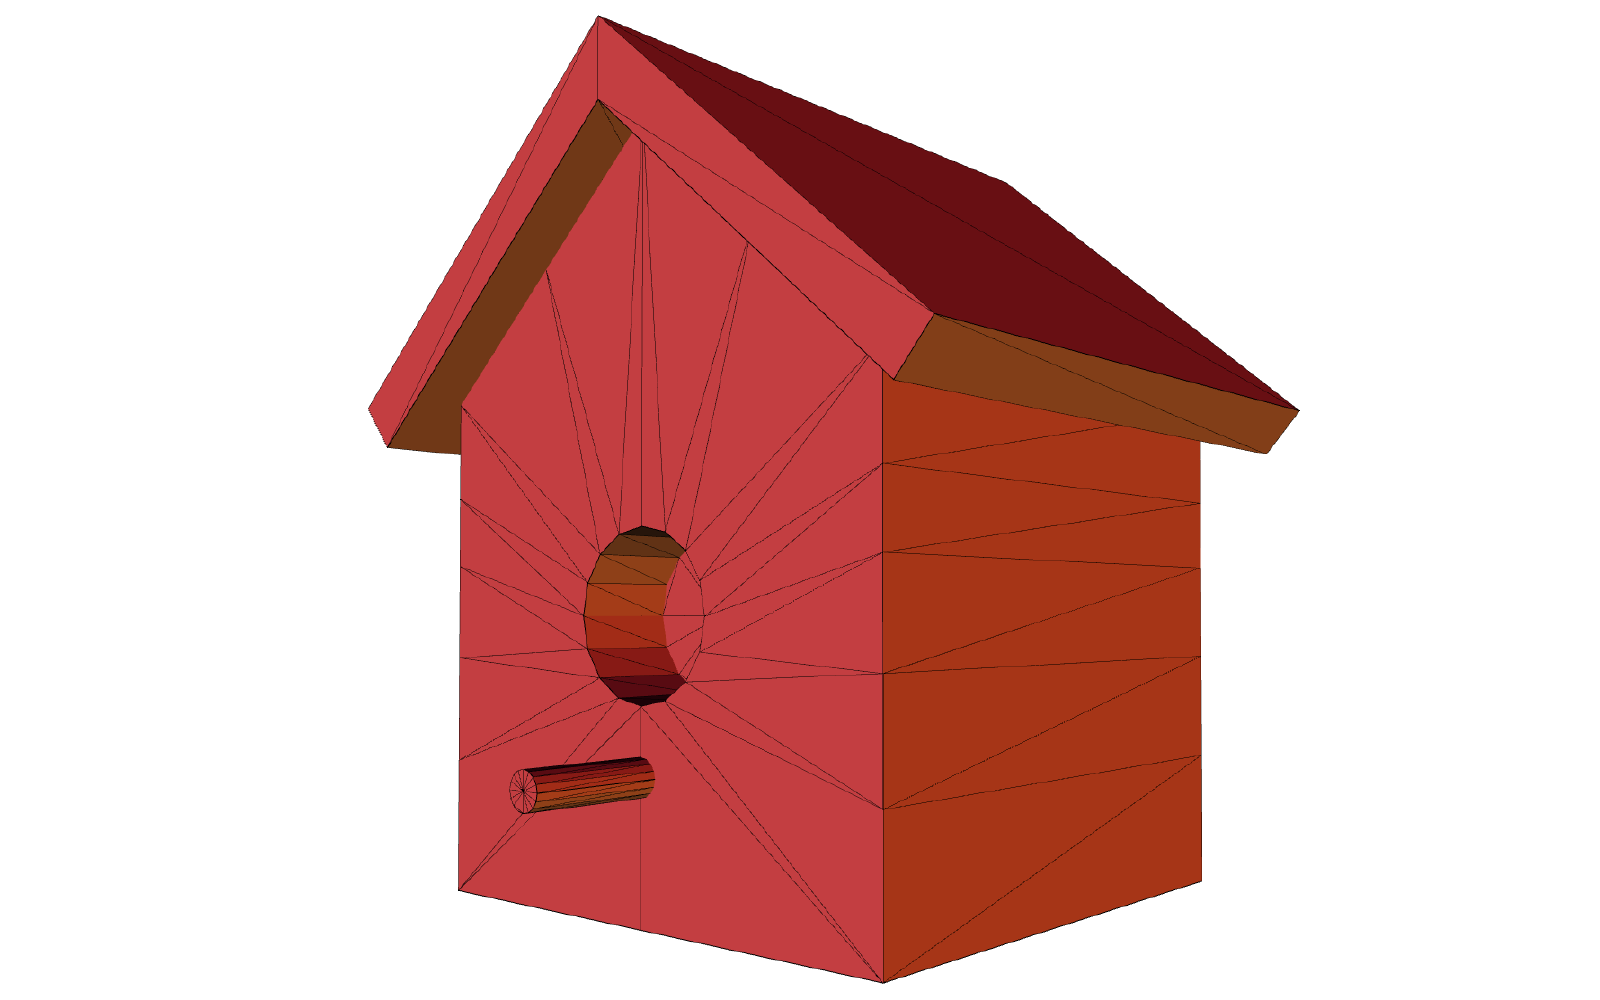 3D Model of a Birdhouse For Drawing Reference